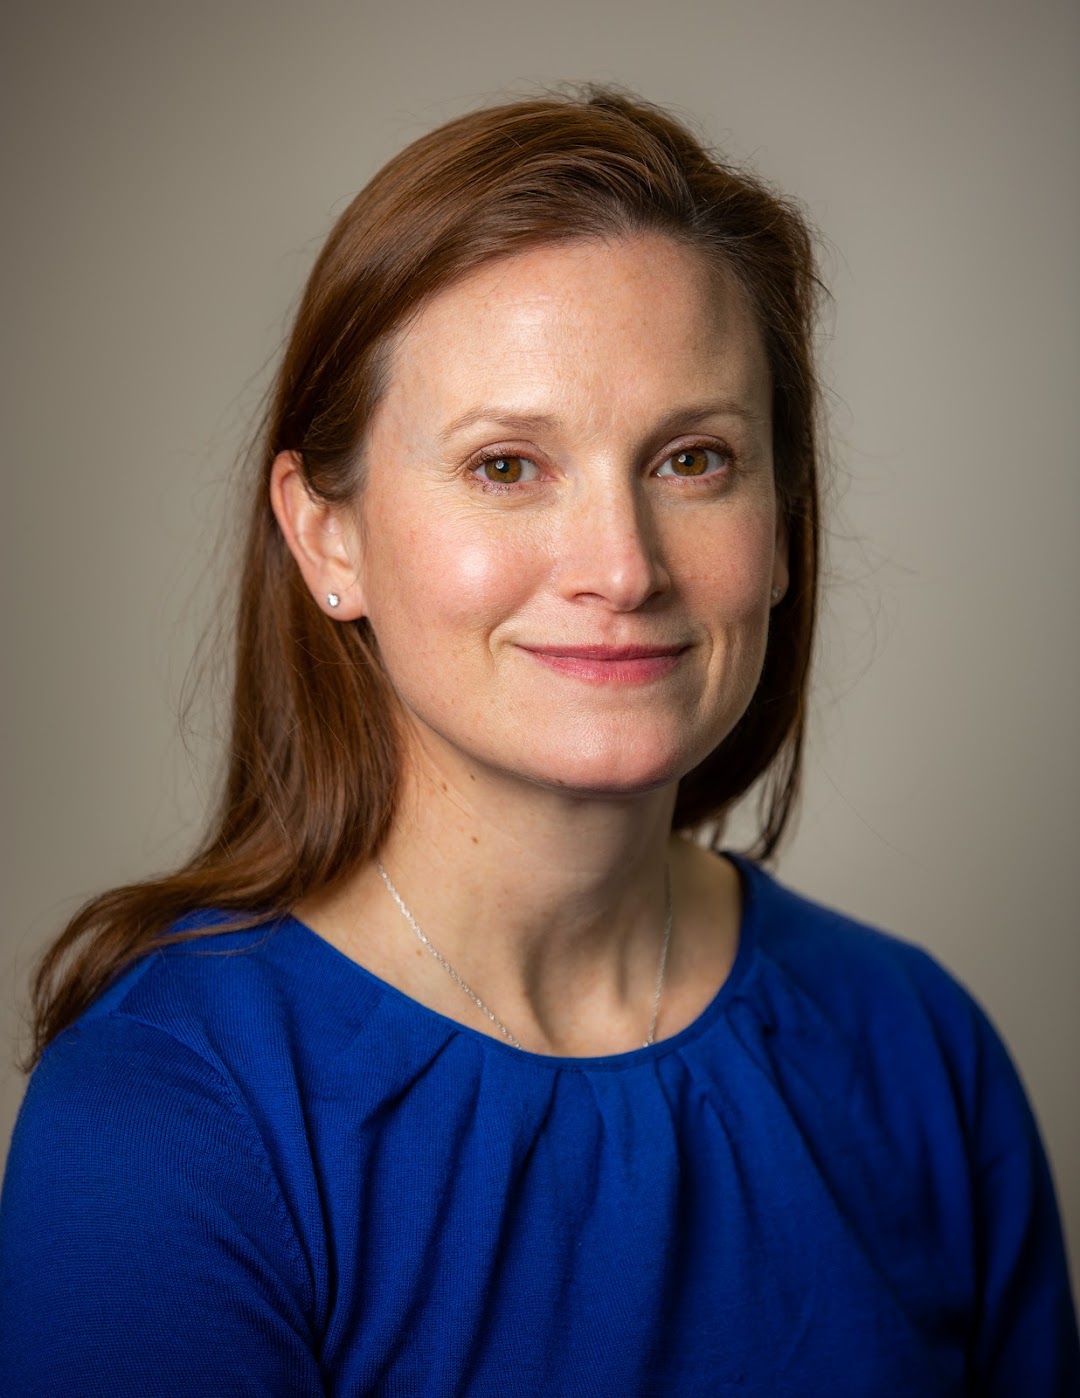 Camille M. Clinton, MD